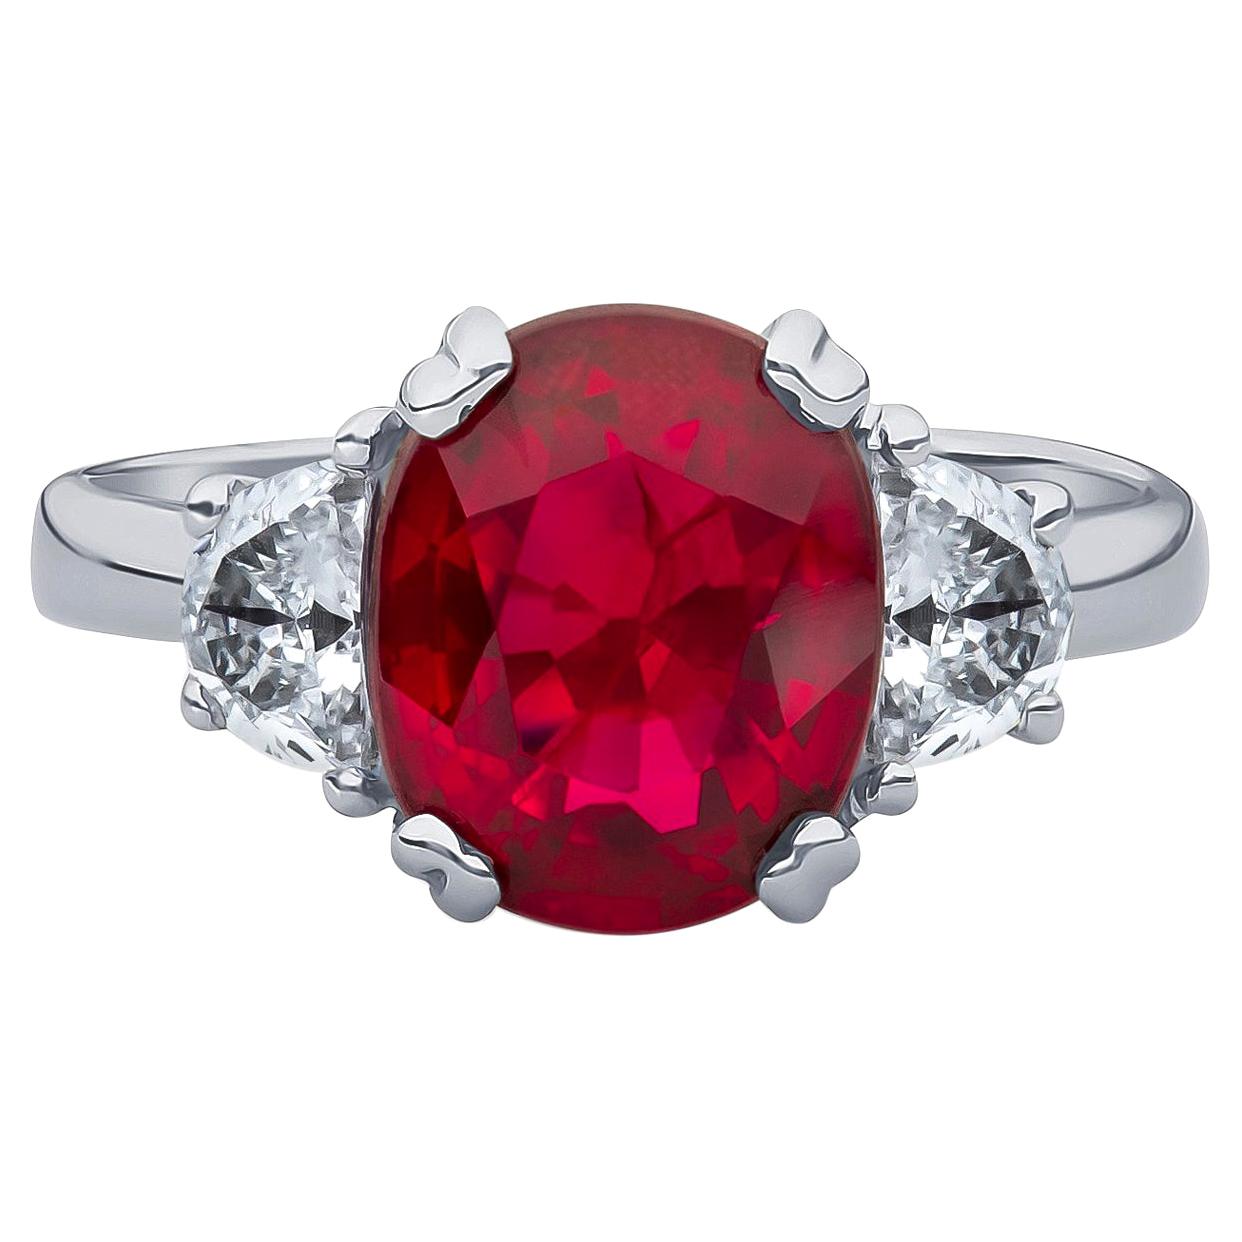 3.11 Carat Oval Cut Natural Thai Ruby Ring with 0.50 Carat Total of Diamonds For Sale